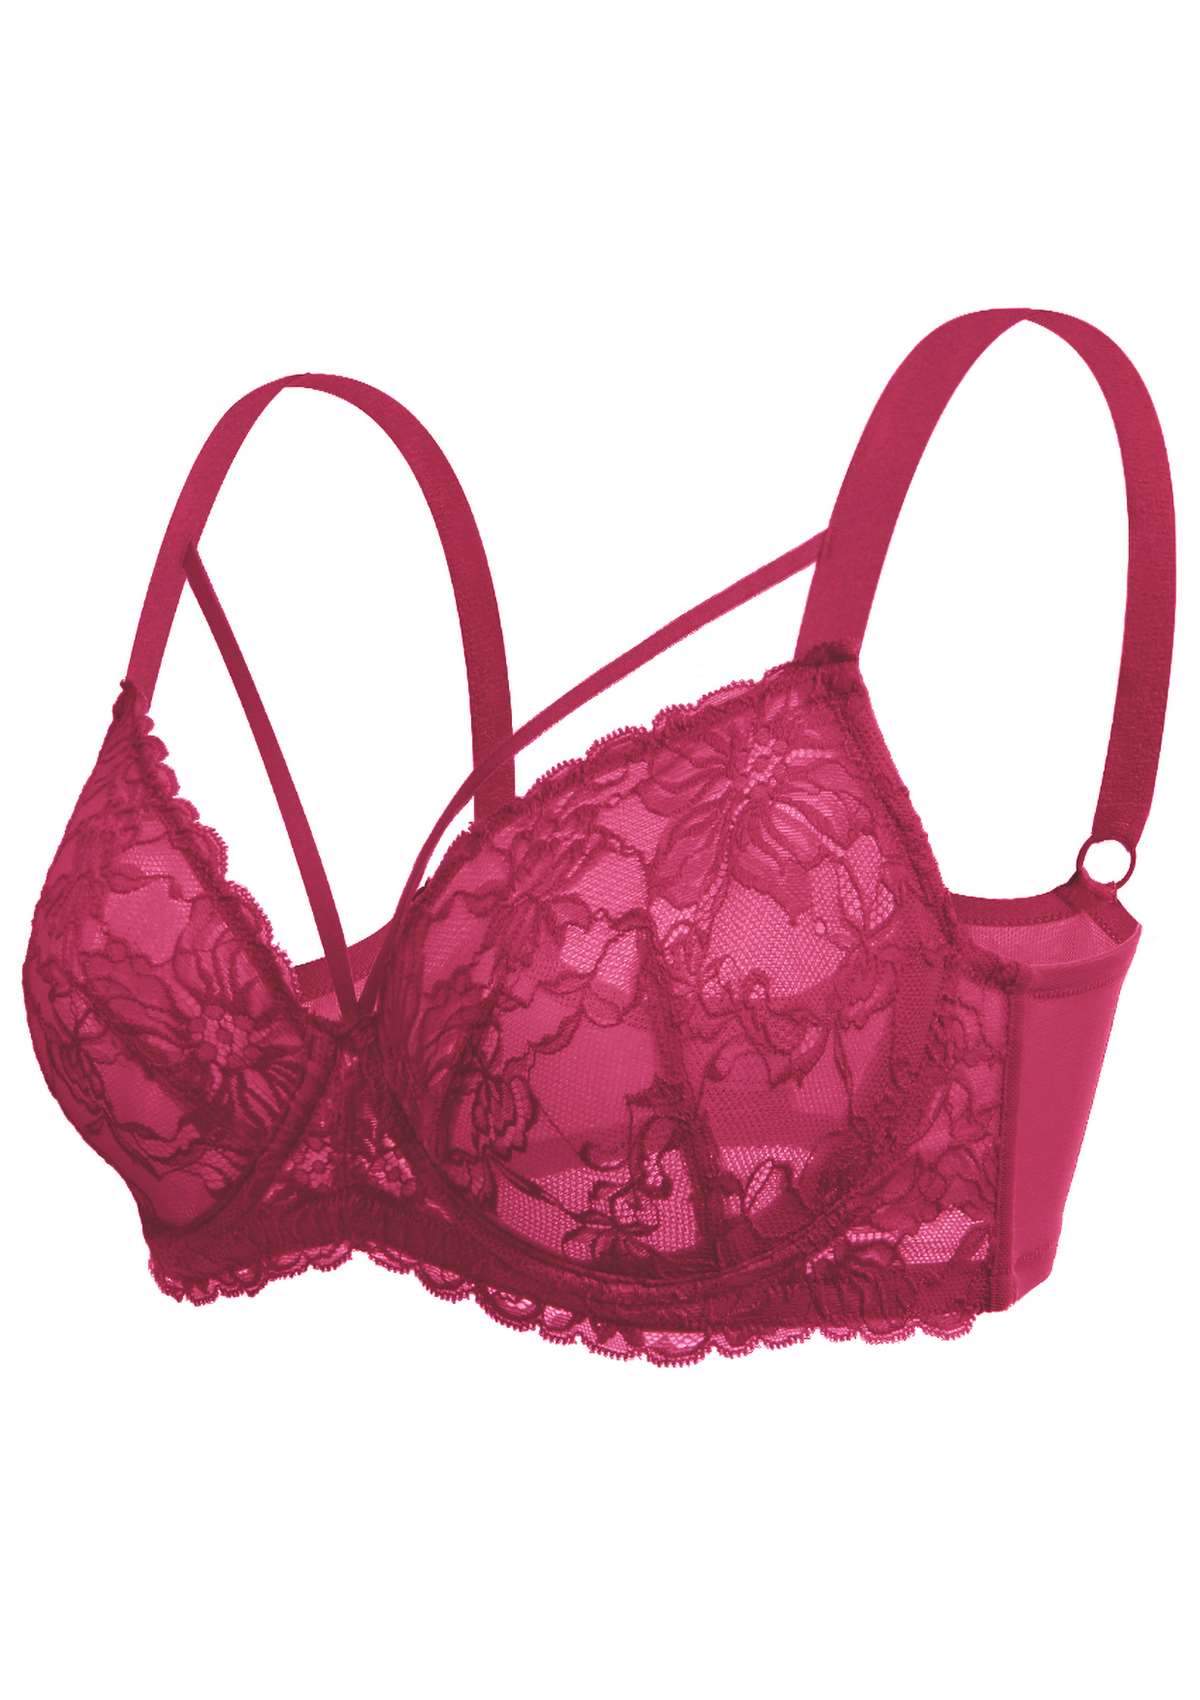 HSIA Pretty In Petals Sexy Lace Bra: Full Coverage Back Smoothing Bra - Red / 40 / C